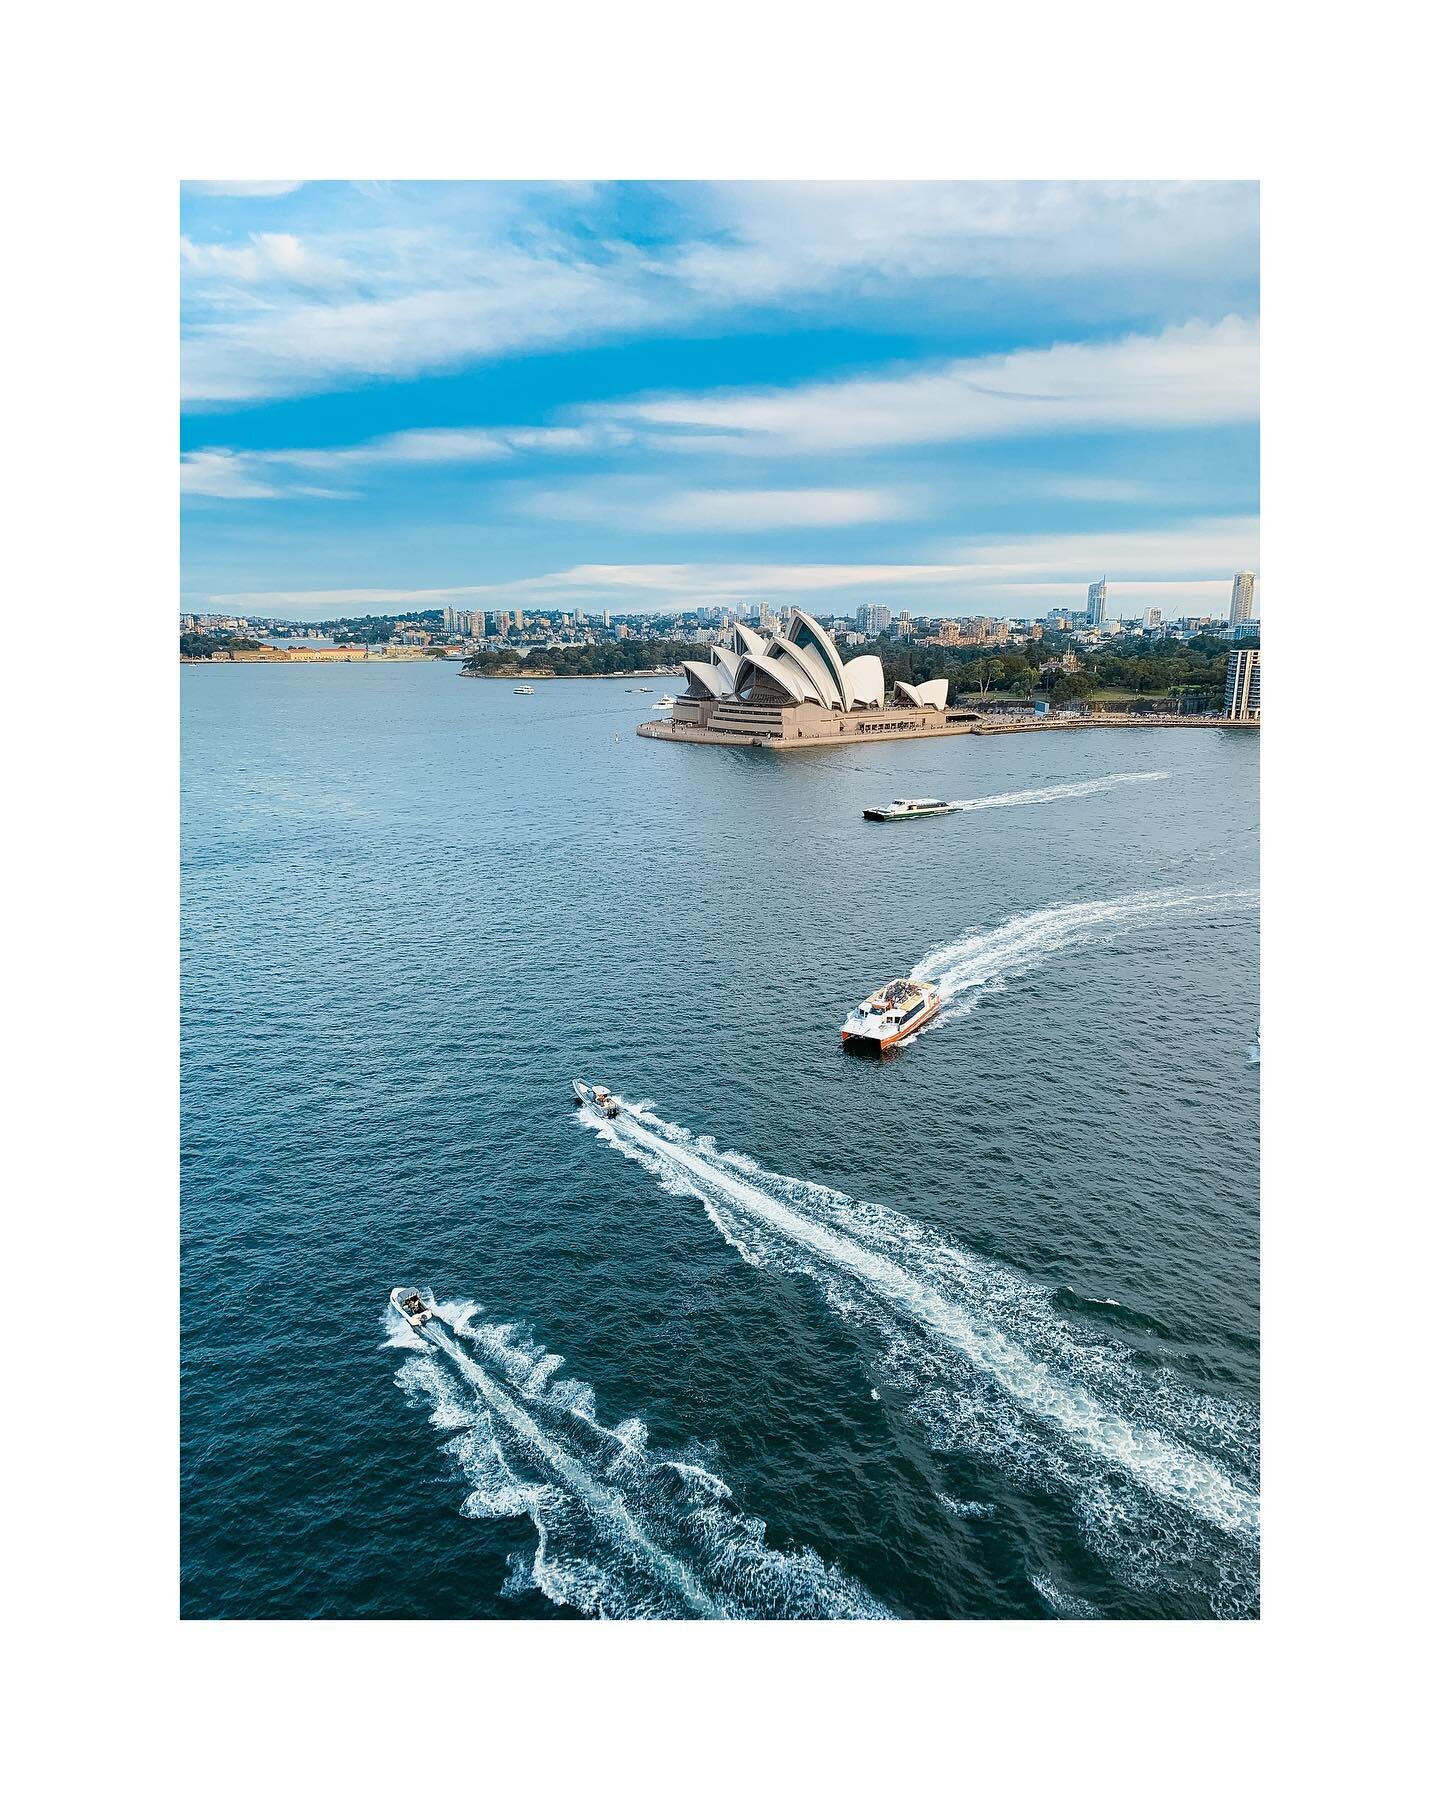 Captured from above, this image showcases the power of smartphone photography to create breathtaking compositions. The boats create intriguing lines that balance the framing and the curved architecture of the Sydney Opera House and the fluidity of th